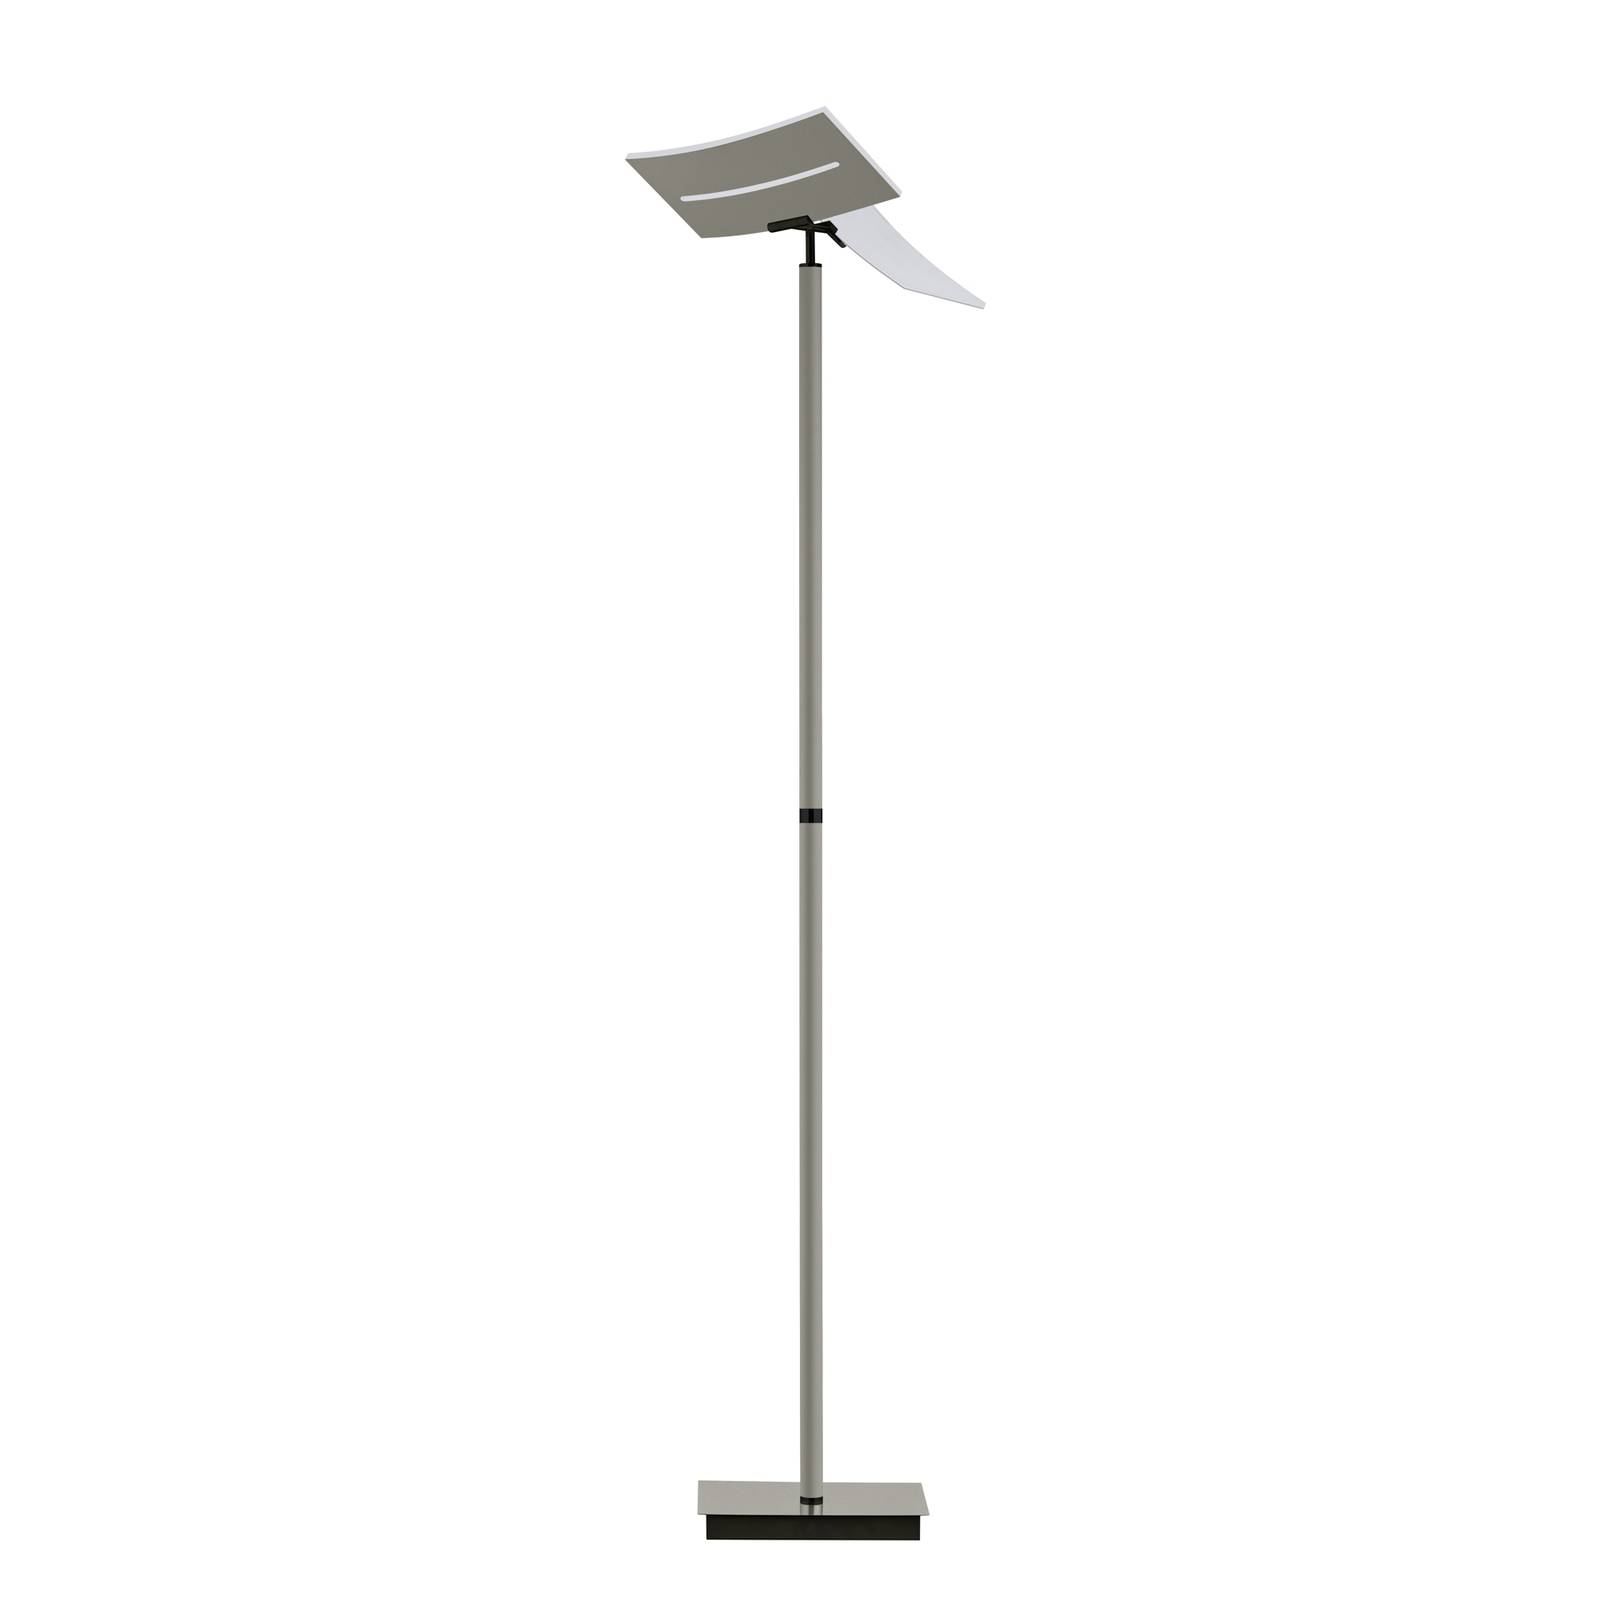 HELL LED-Stehleuchte Evolo CCT, taupe